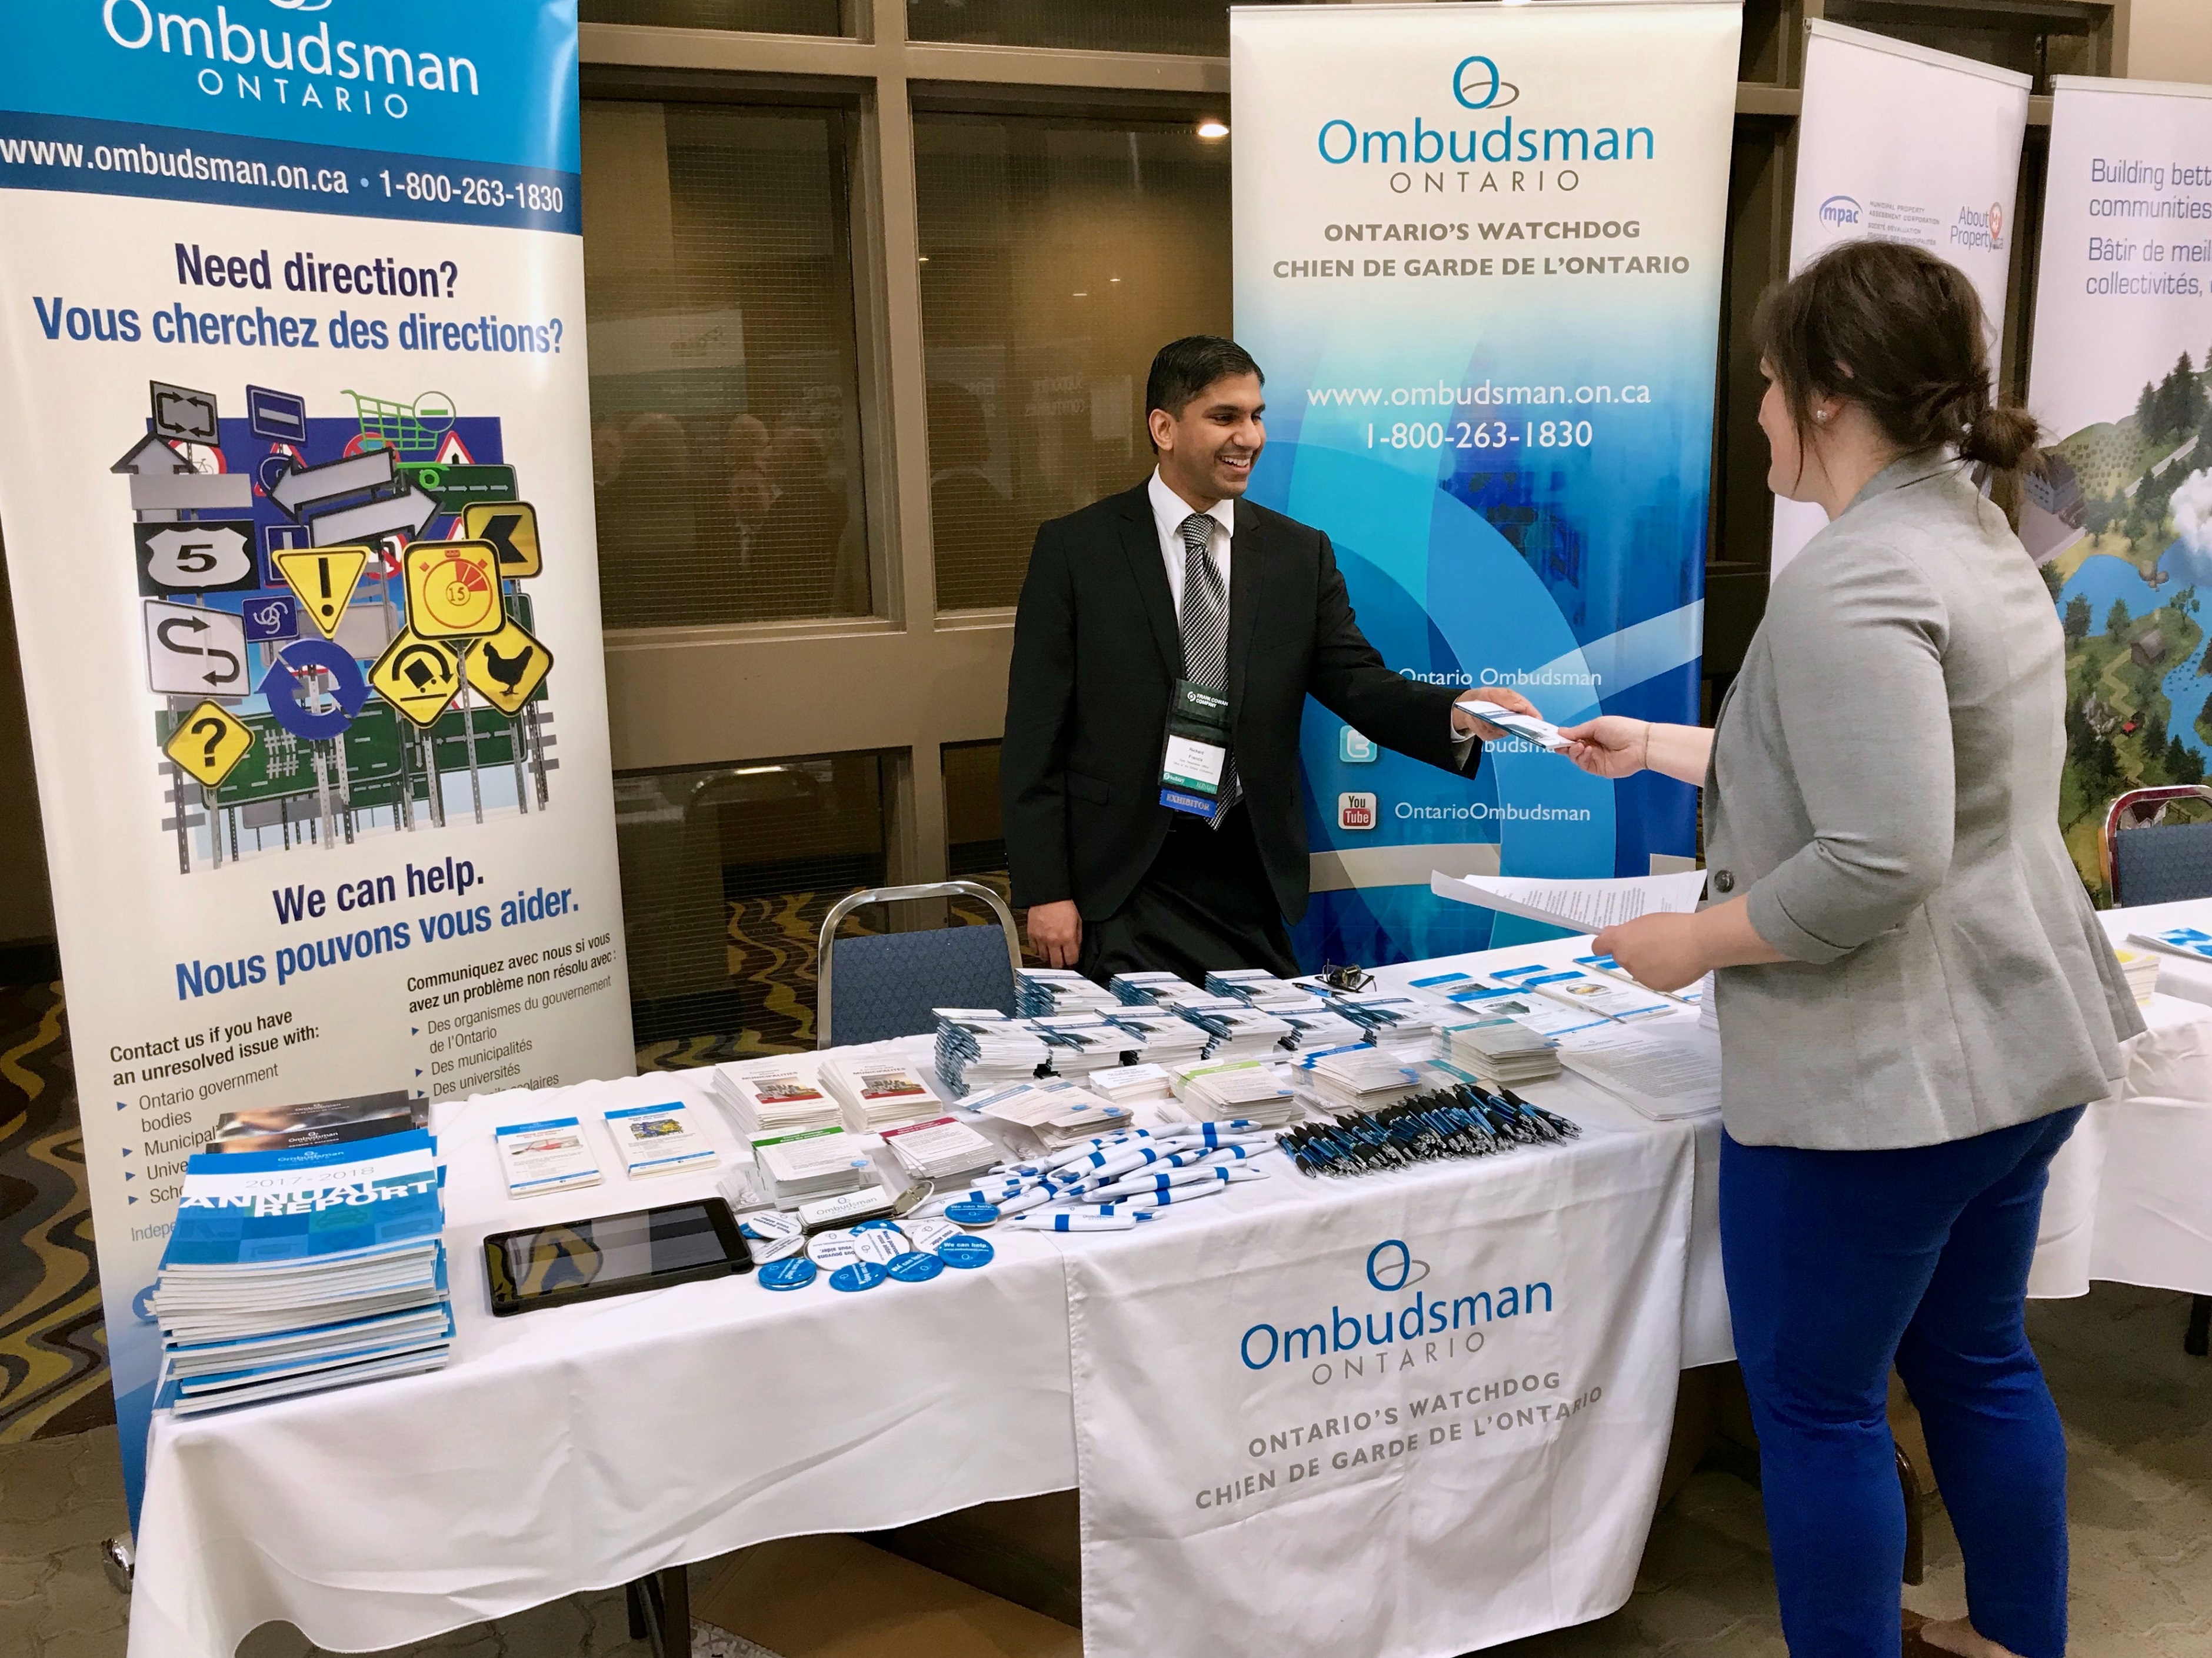 Ombudsman staff at the Federation of Northern Ontario Municipalities' 2019 annual conference, Sudbury